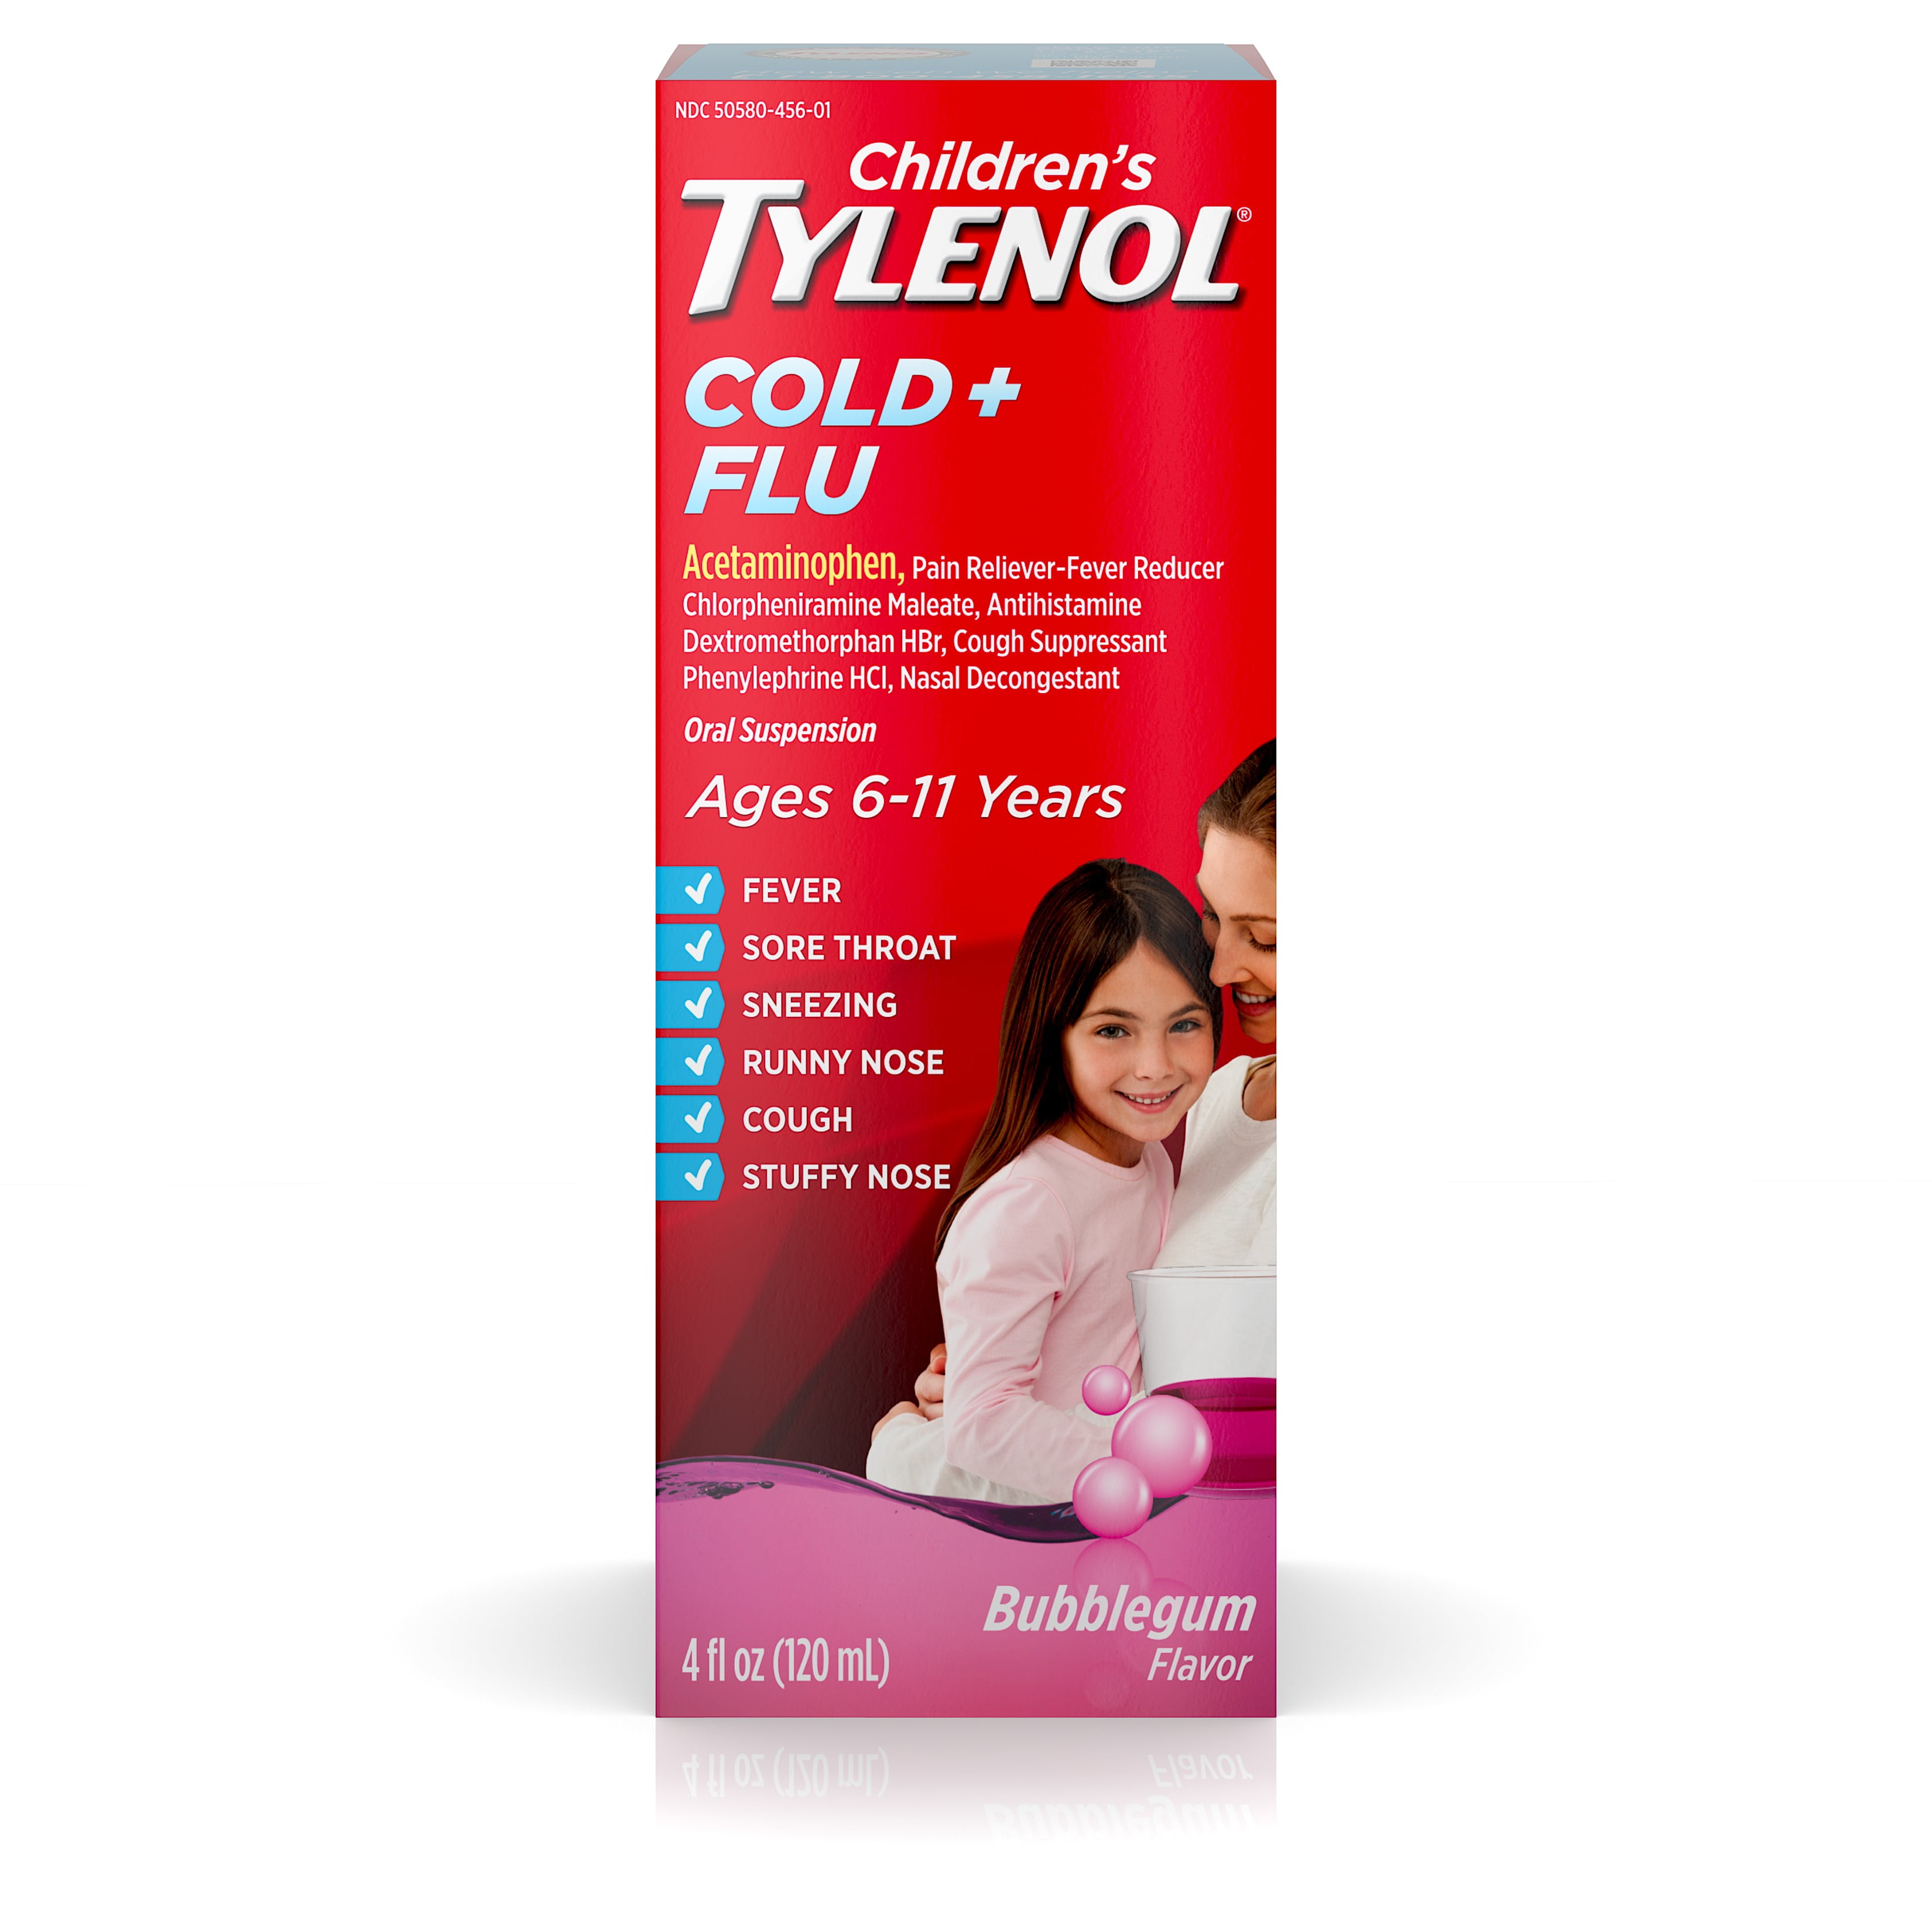 infant tylenol for cold